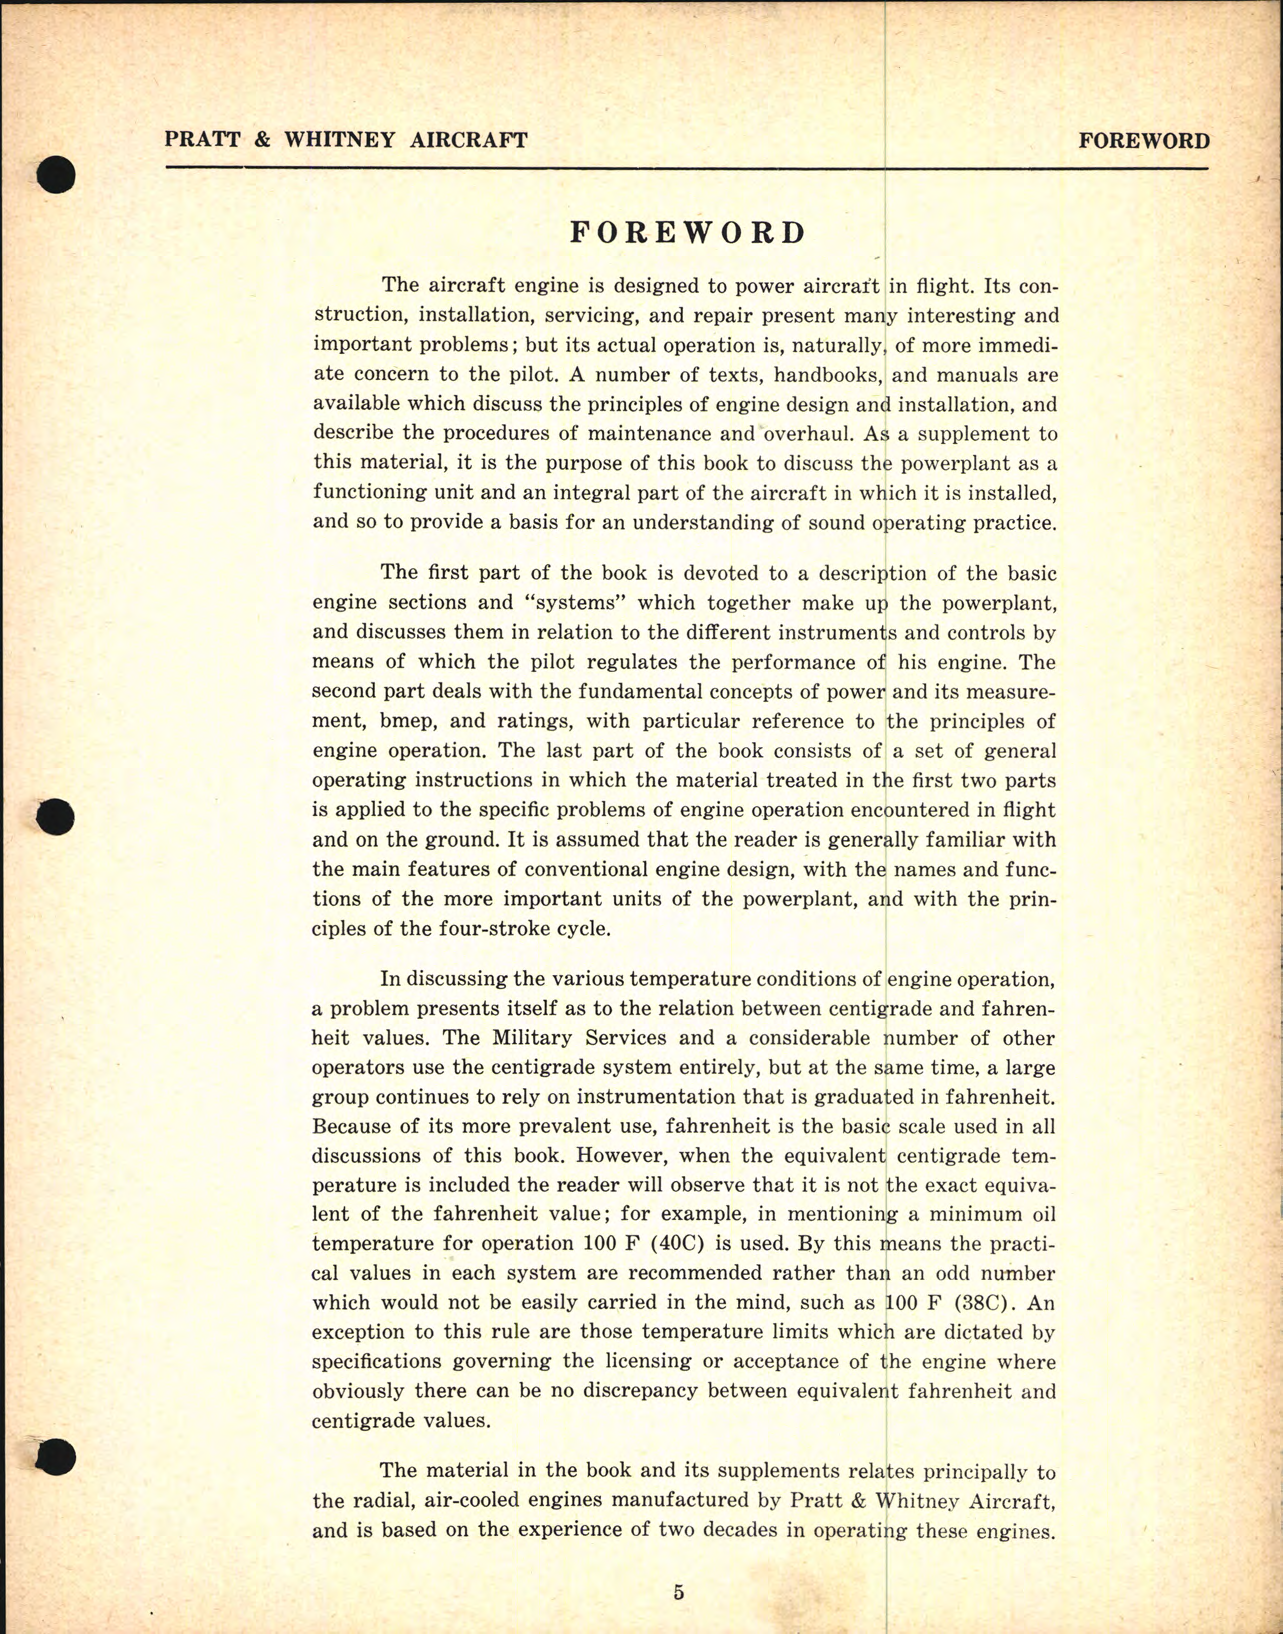 Sample page 5 from AirCorps Library document: The Aircraft engine and its Operation 